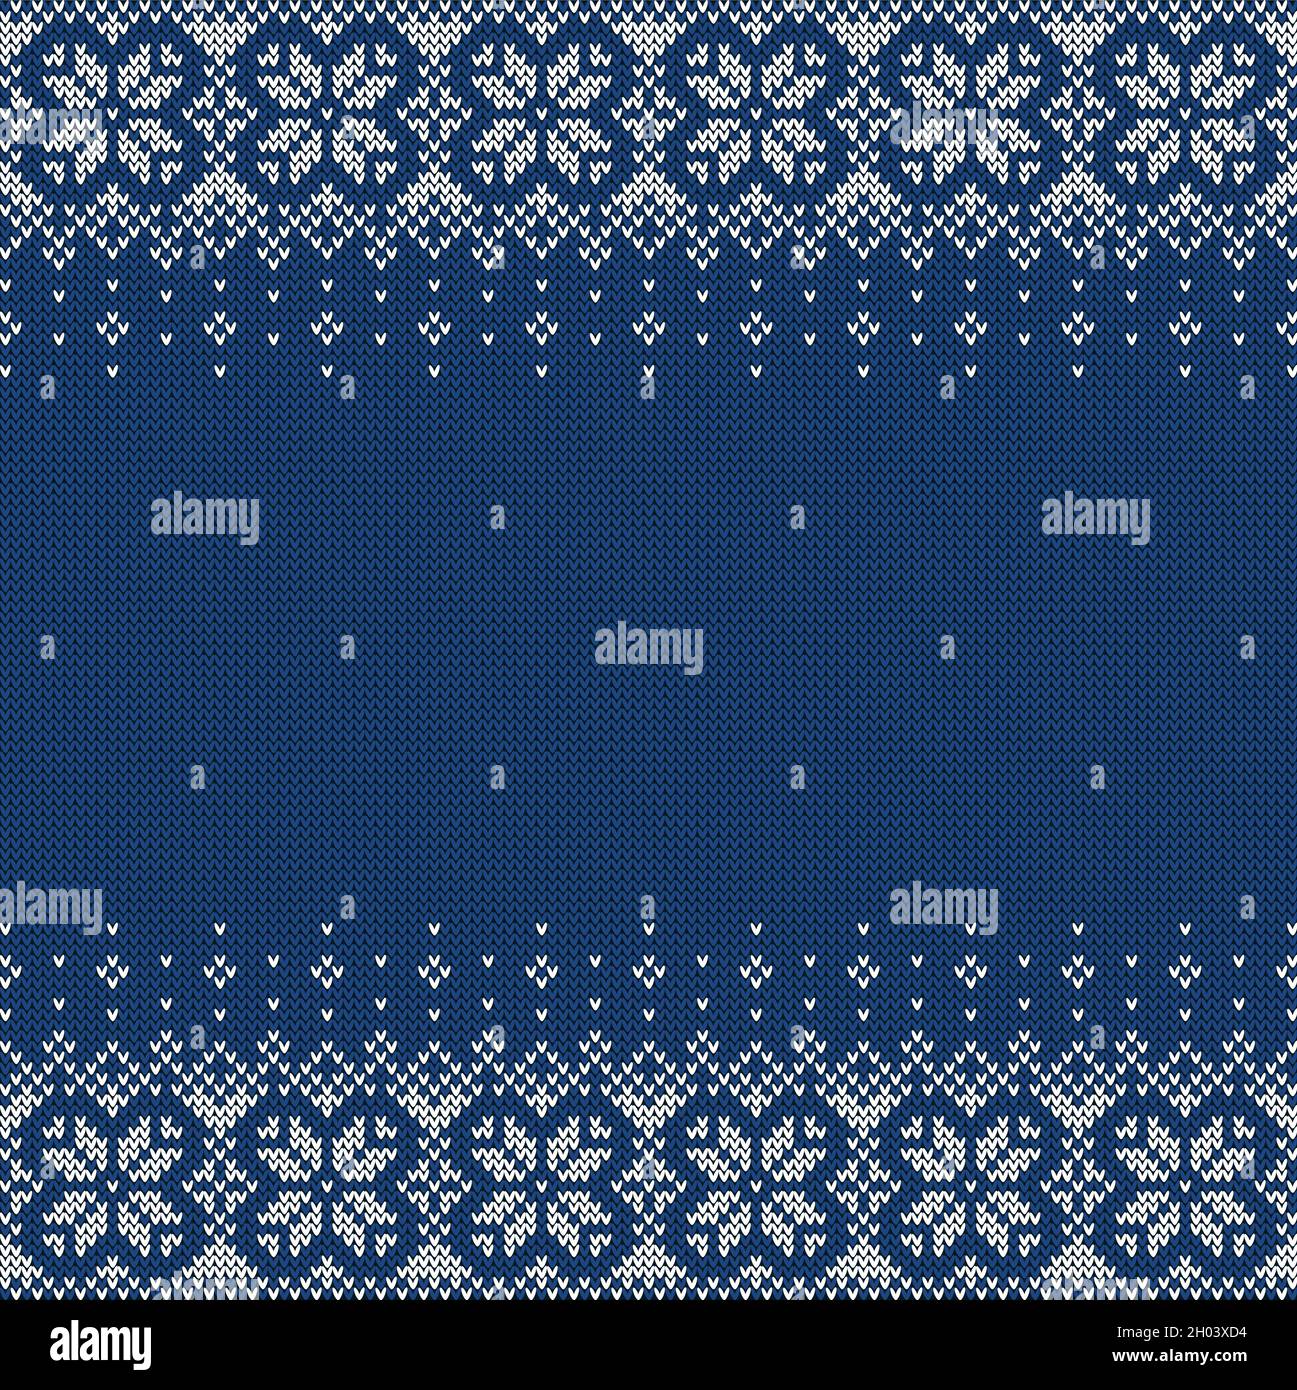 Knitted background with copyspace. Blue and white sweater pattern for Christmas, New Year or winter design. Traditional scandinavian border ornament Stock Vector